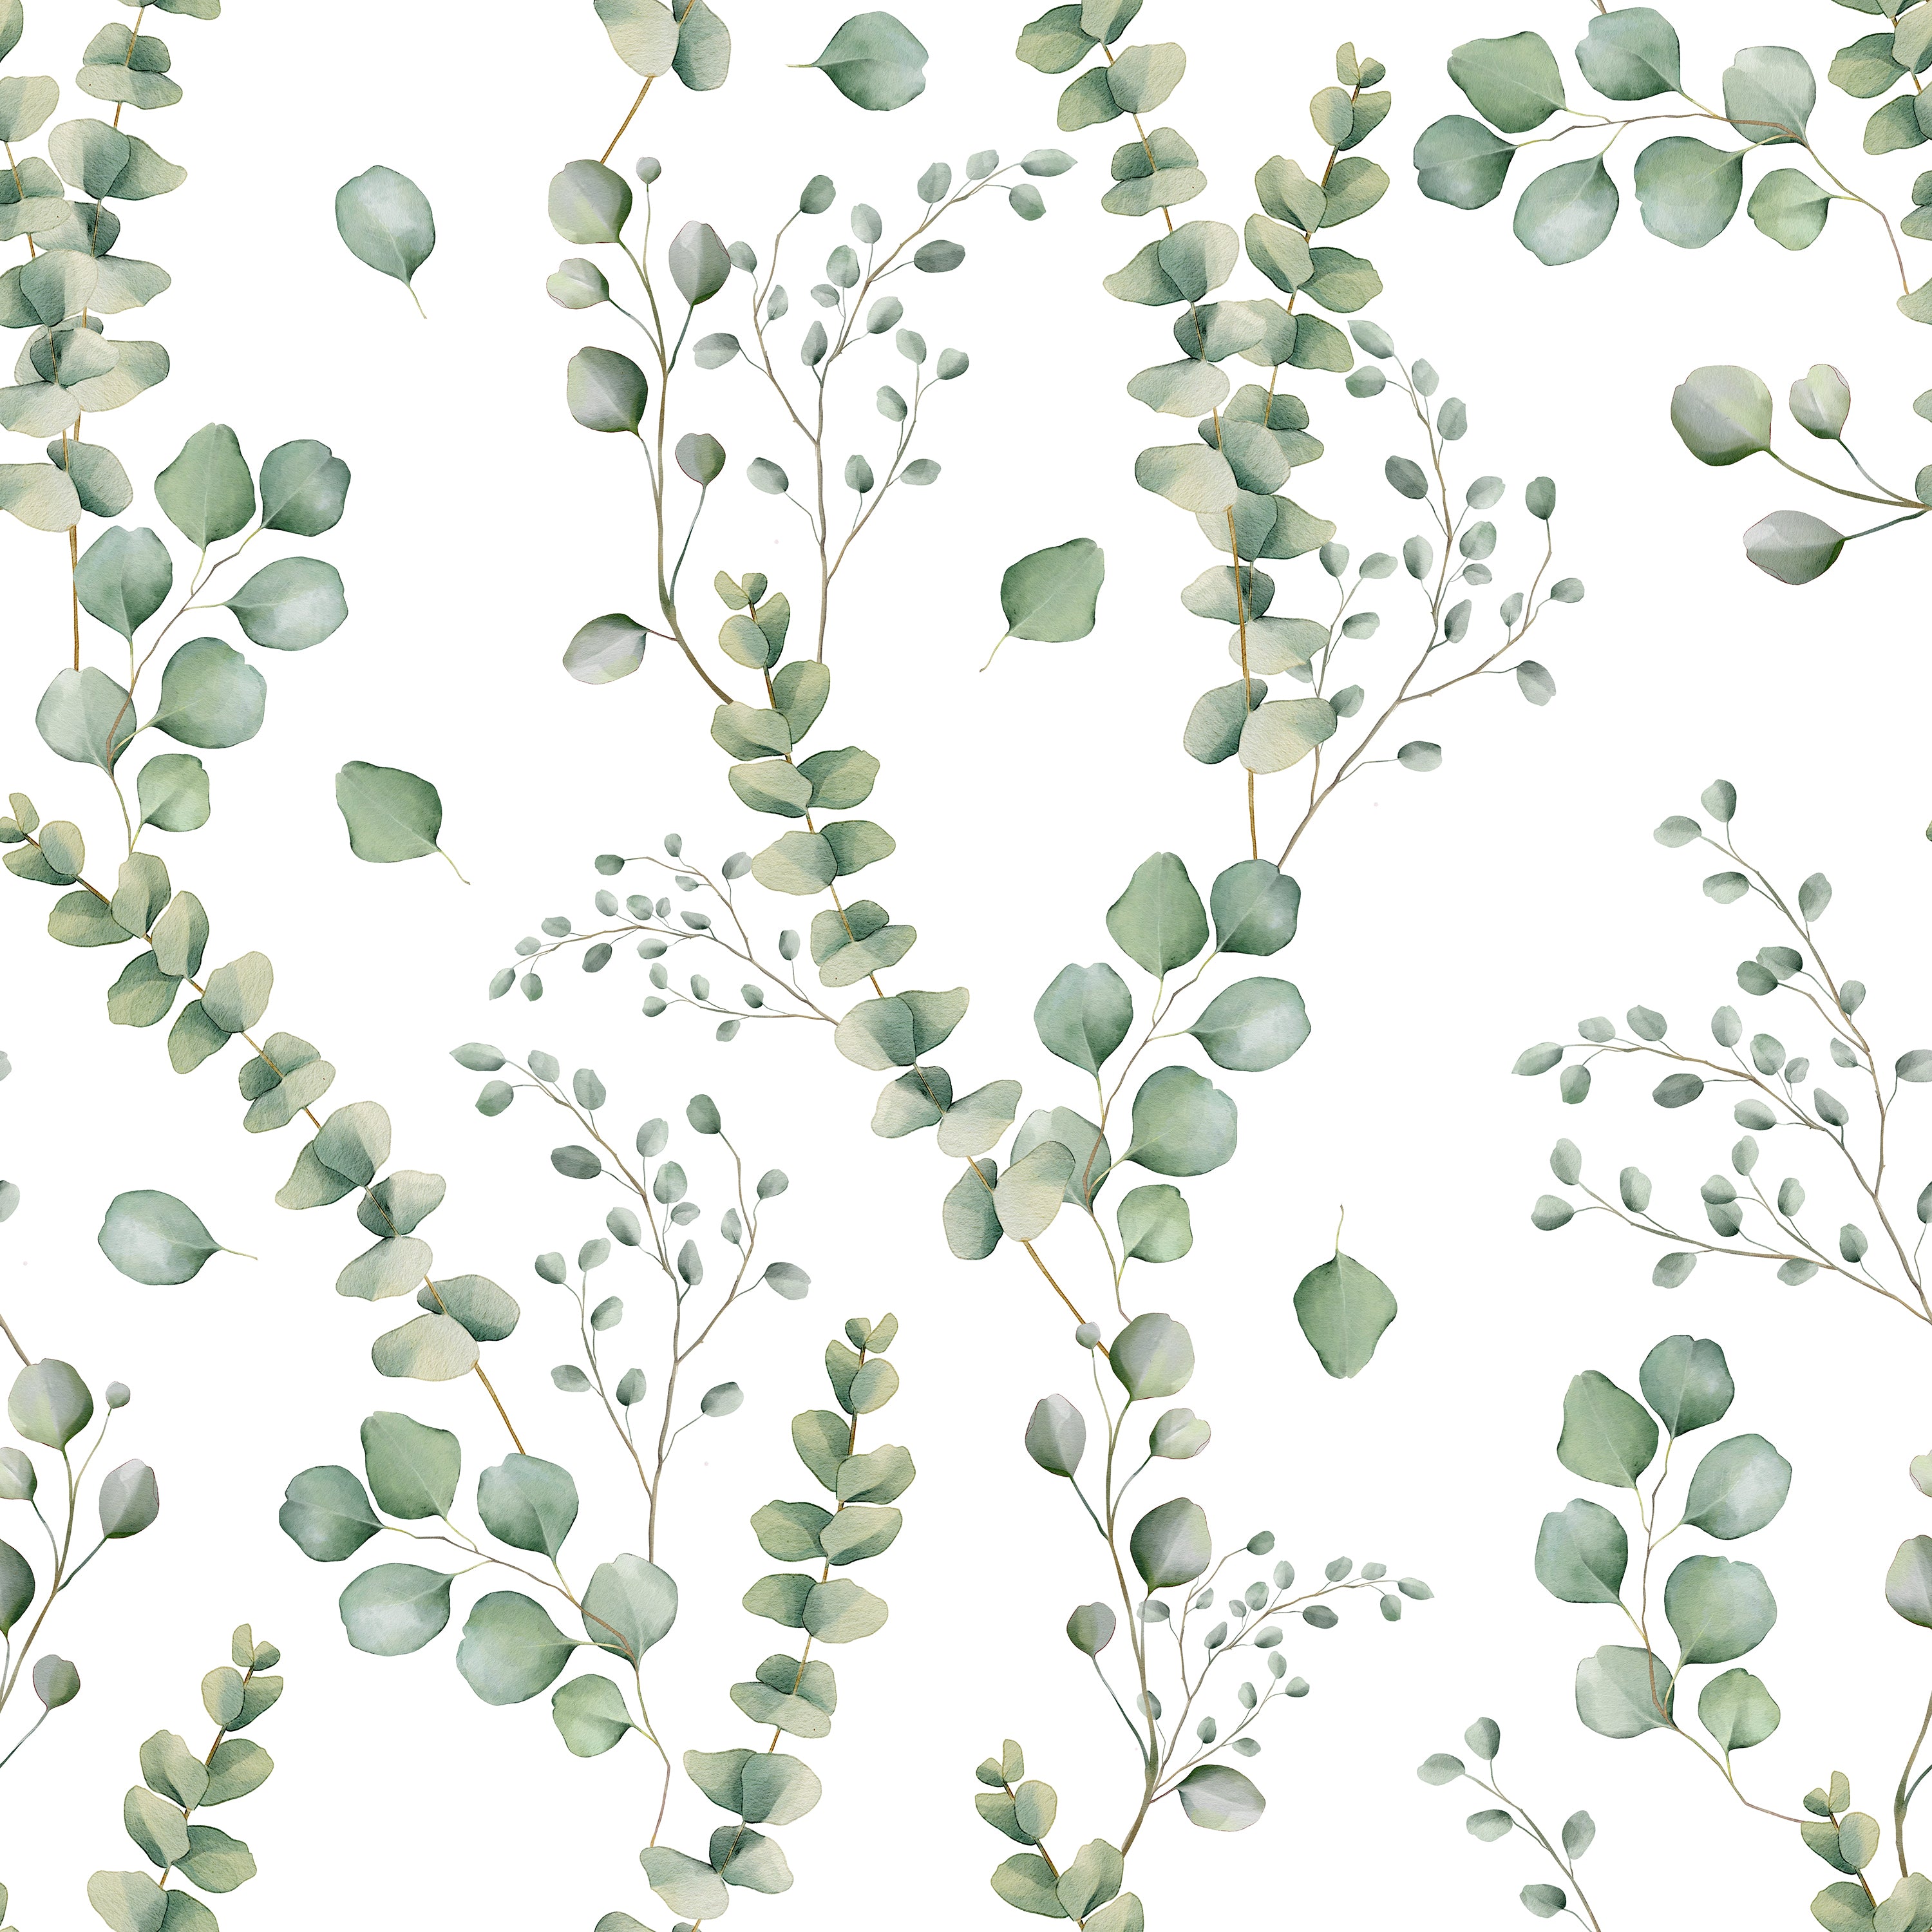 A seamless wallpaper pattern featuring delicate watercolor-style eucalyptus branches with pale green leaves, arranged in a flowing, organic layout. The background is white, emphasizing the freshness and simplicity of the botanical theme.